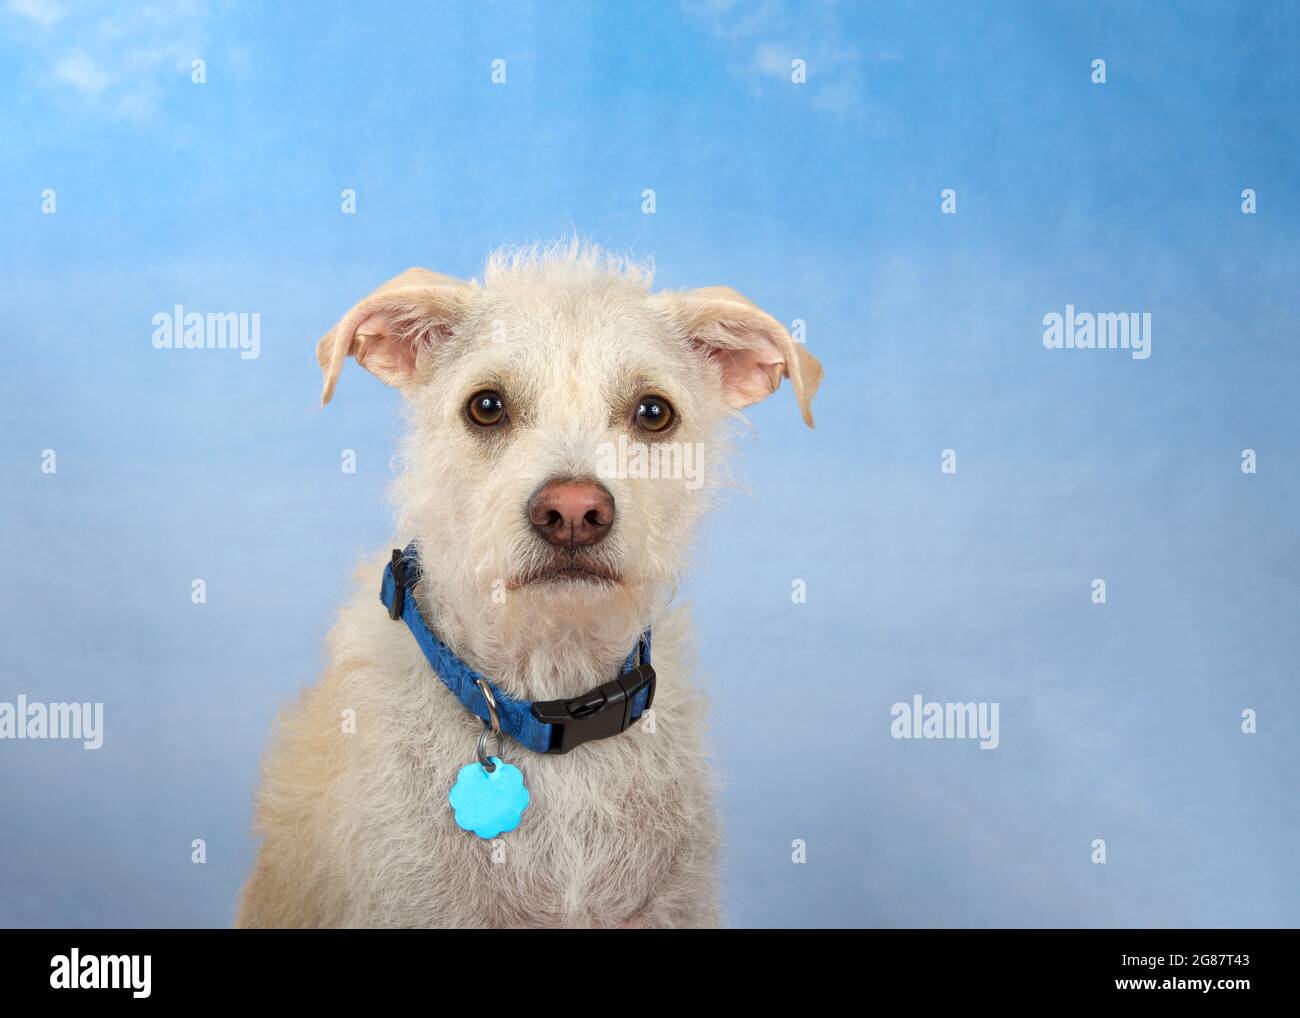 Portrait of an adorable Jack Russell Terrier mix puppy dog wearing a blue collar  looking directly at viewer. Blue sky like background. Stock Photo